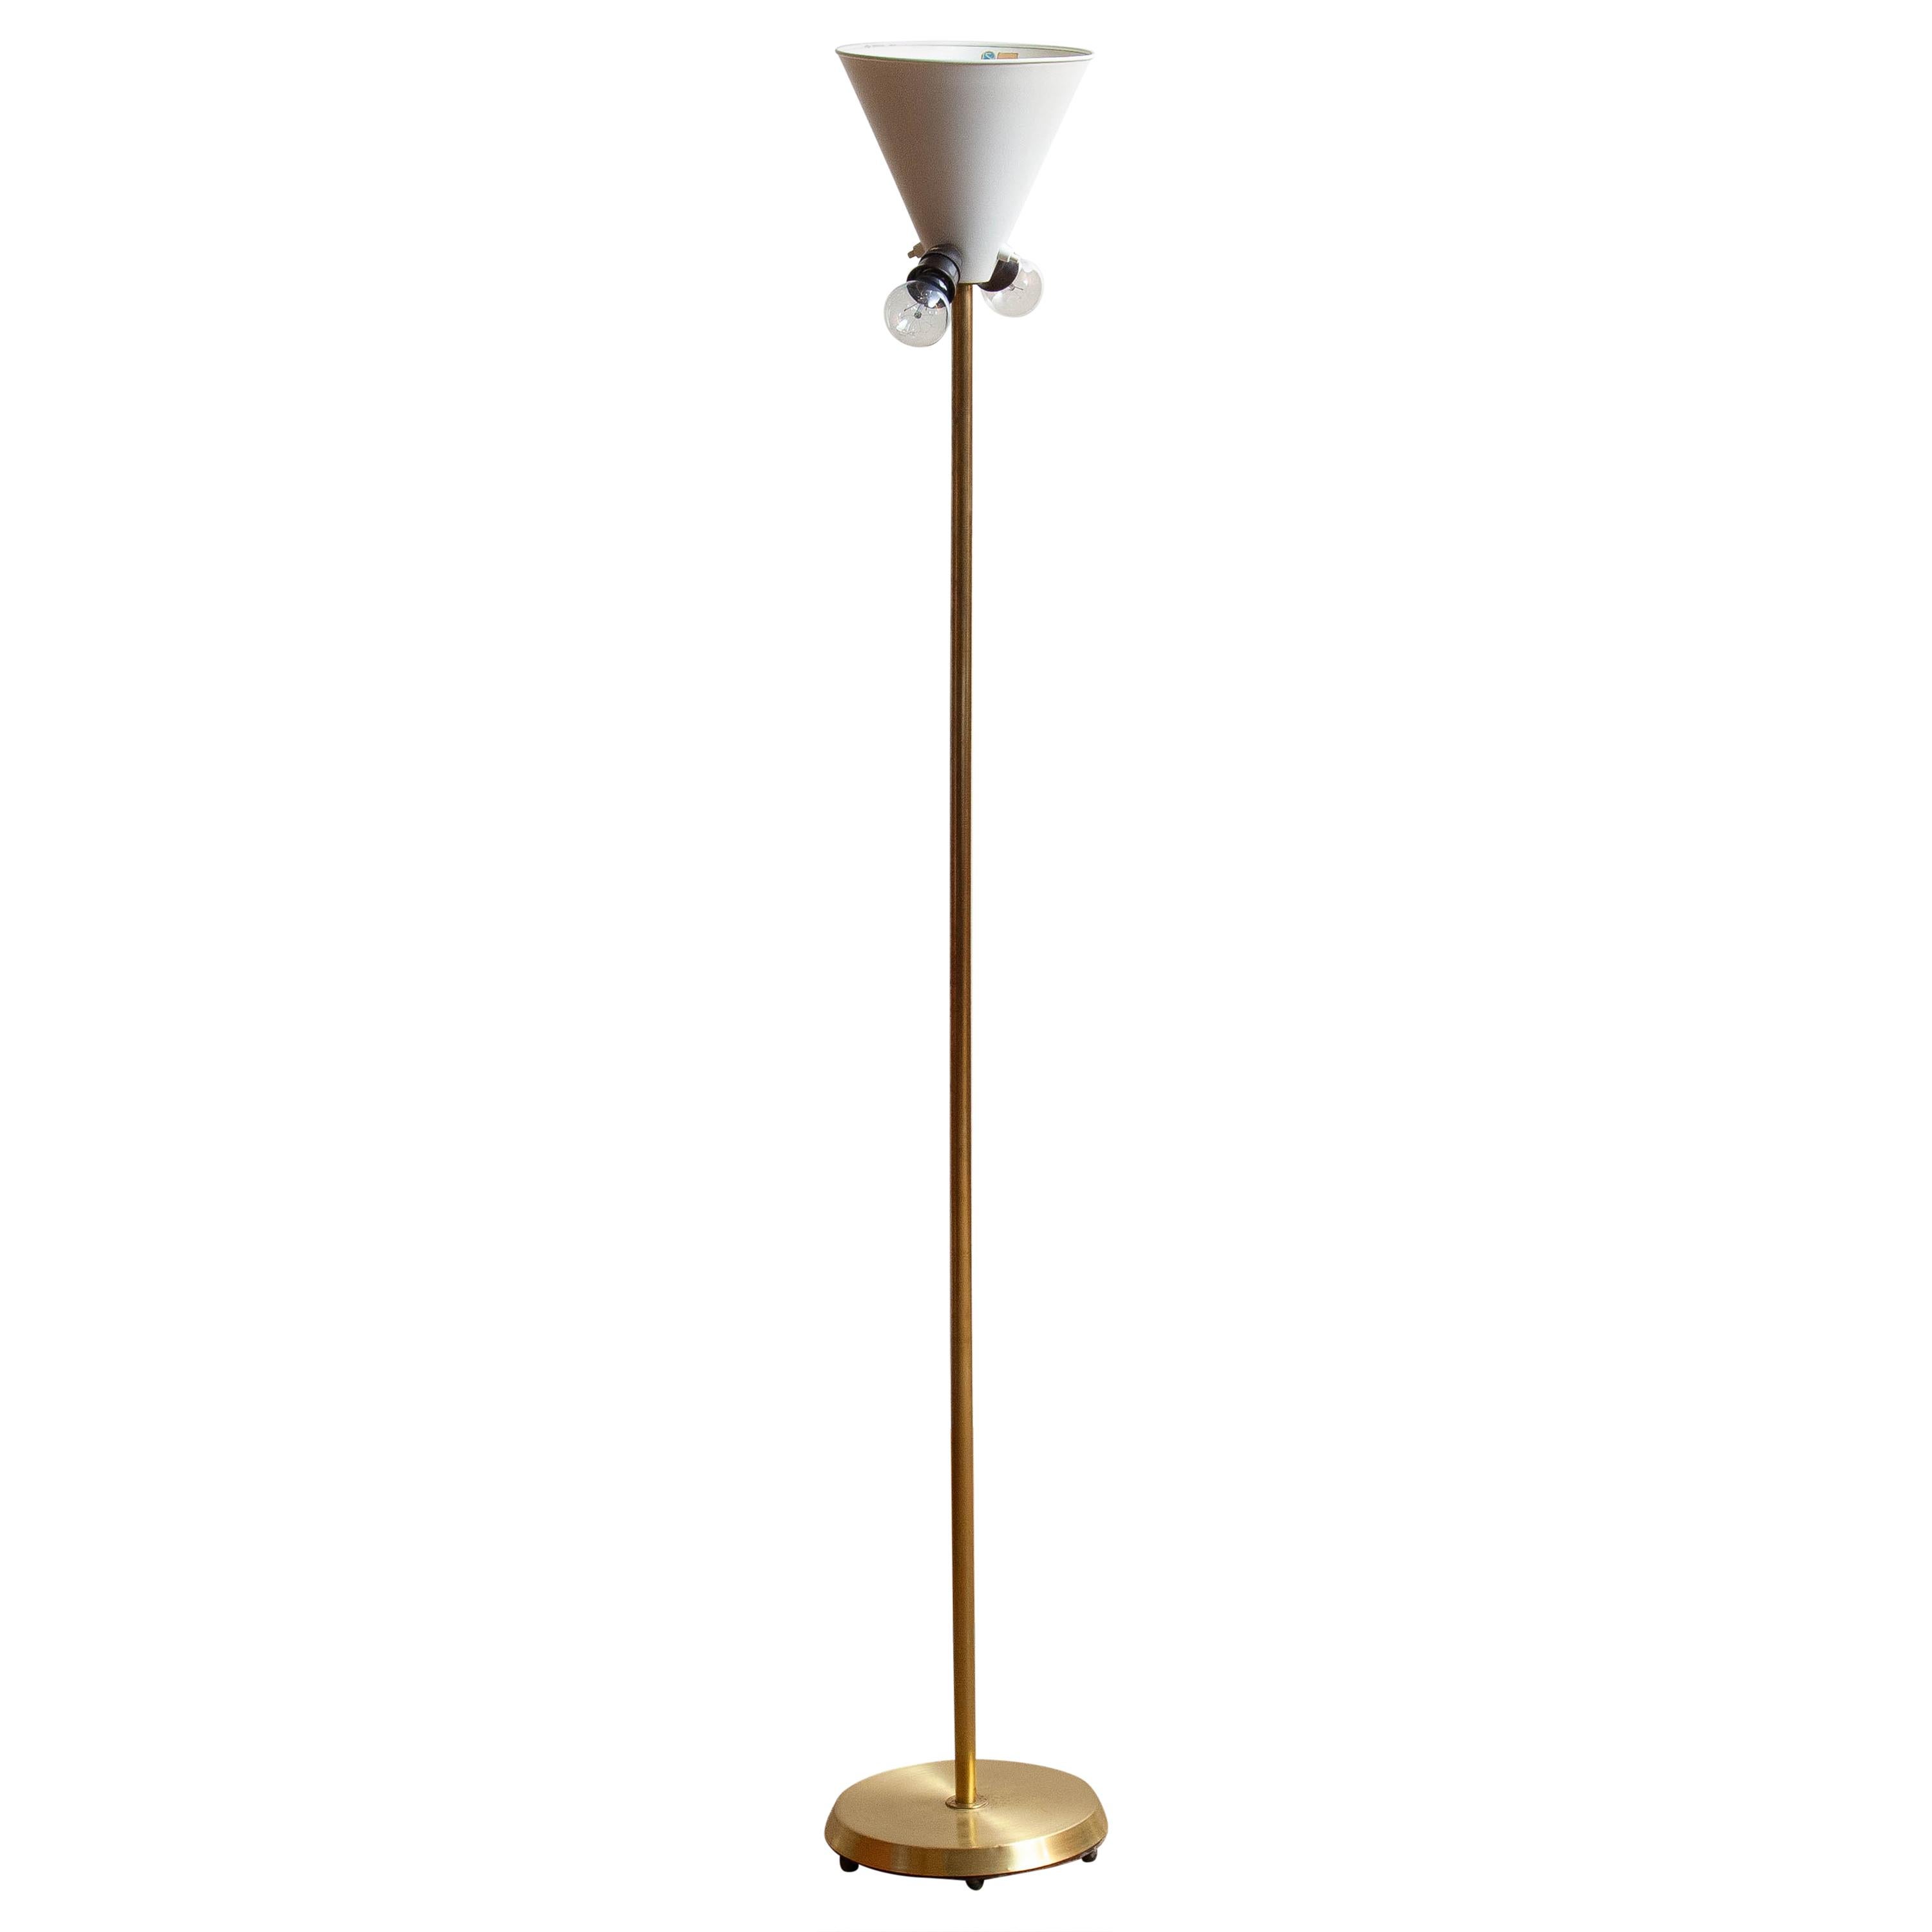 Swedish 1950s, Up-Light Floor Lamp in Brass and Metal by Fagerhults Belysning, Sweden